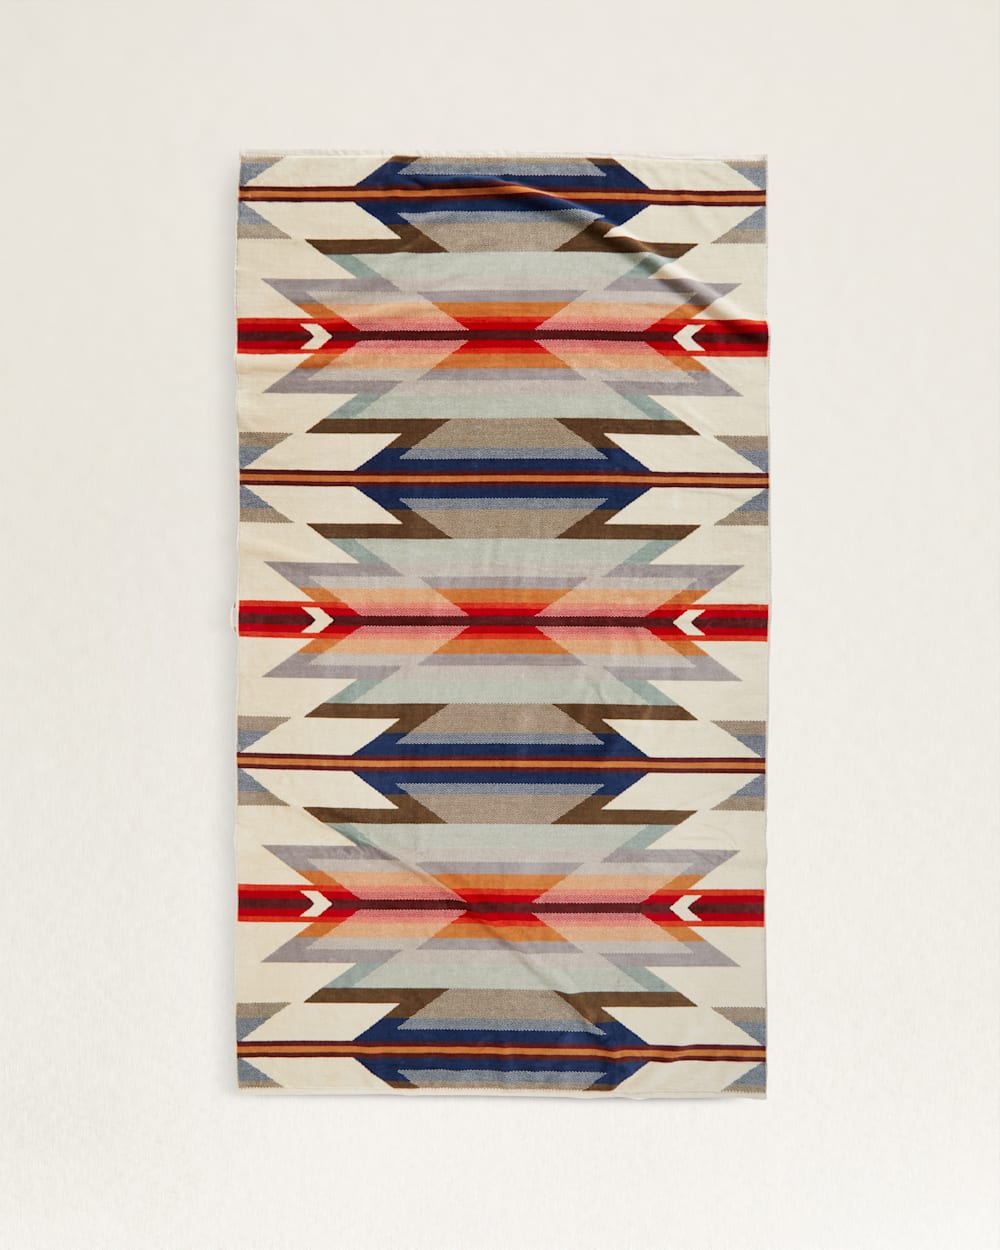 A colorful geometric patterned spa towel inspired by Scottsdale, Arizona, featuring an array of triangles and chevron shapes in shades of red, blue, beige, and gray from Pendleton/Babblitt's Wholesale.